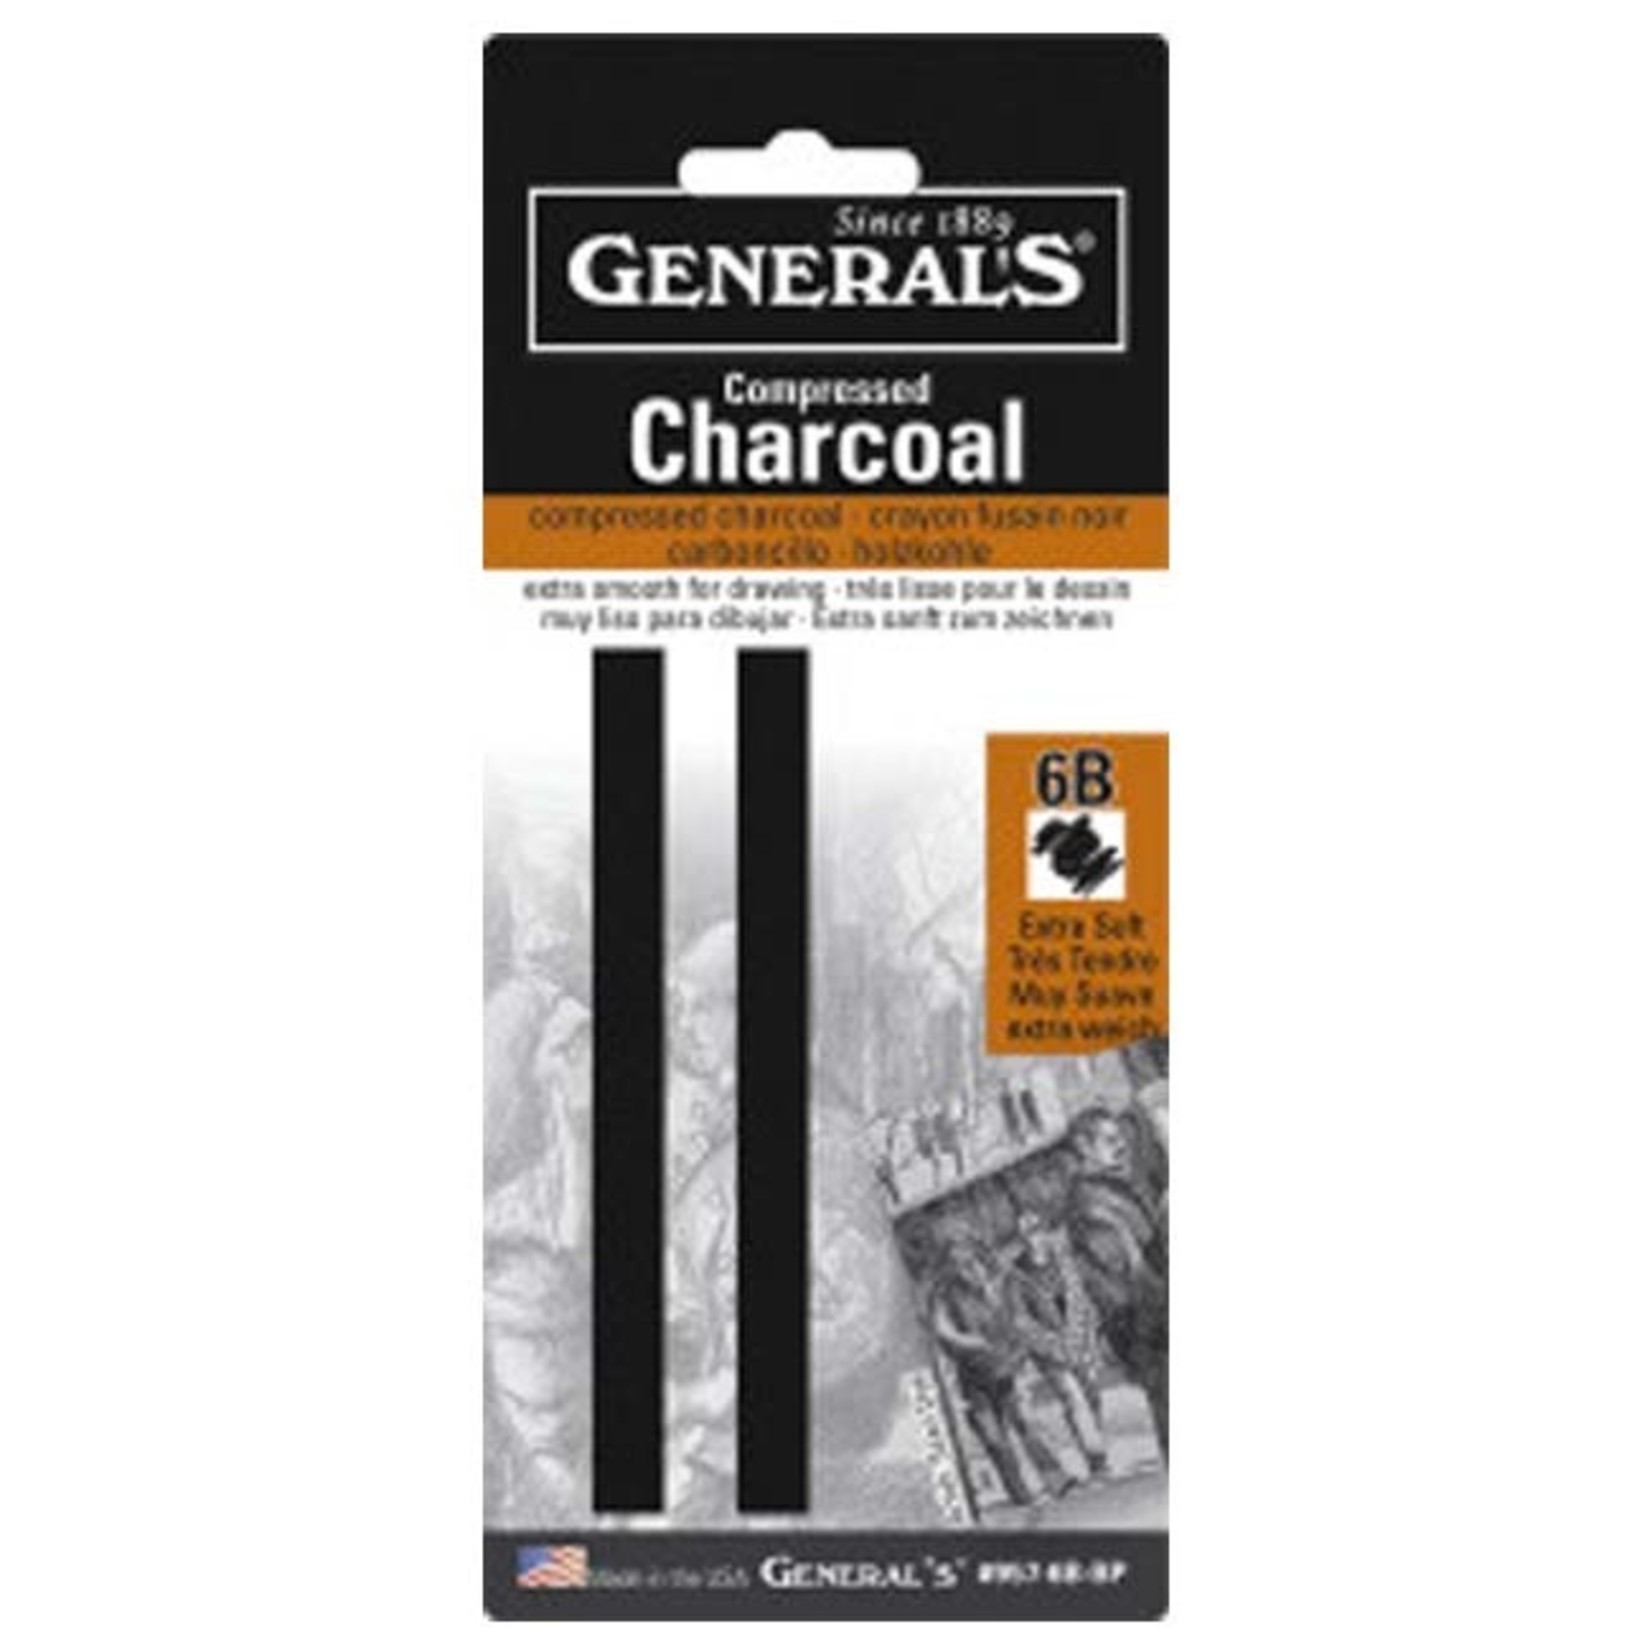 GENERAL'S COMPRESSED CHARCOAL 6B EXTRA SOFT 2/PK